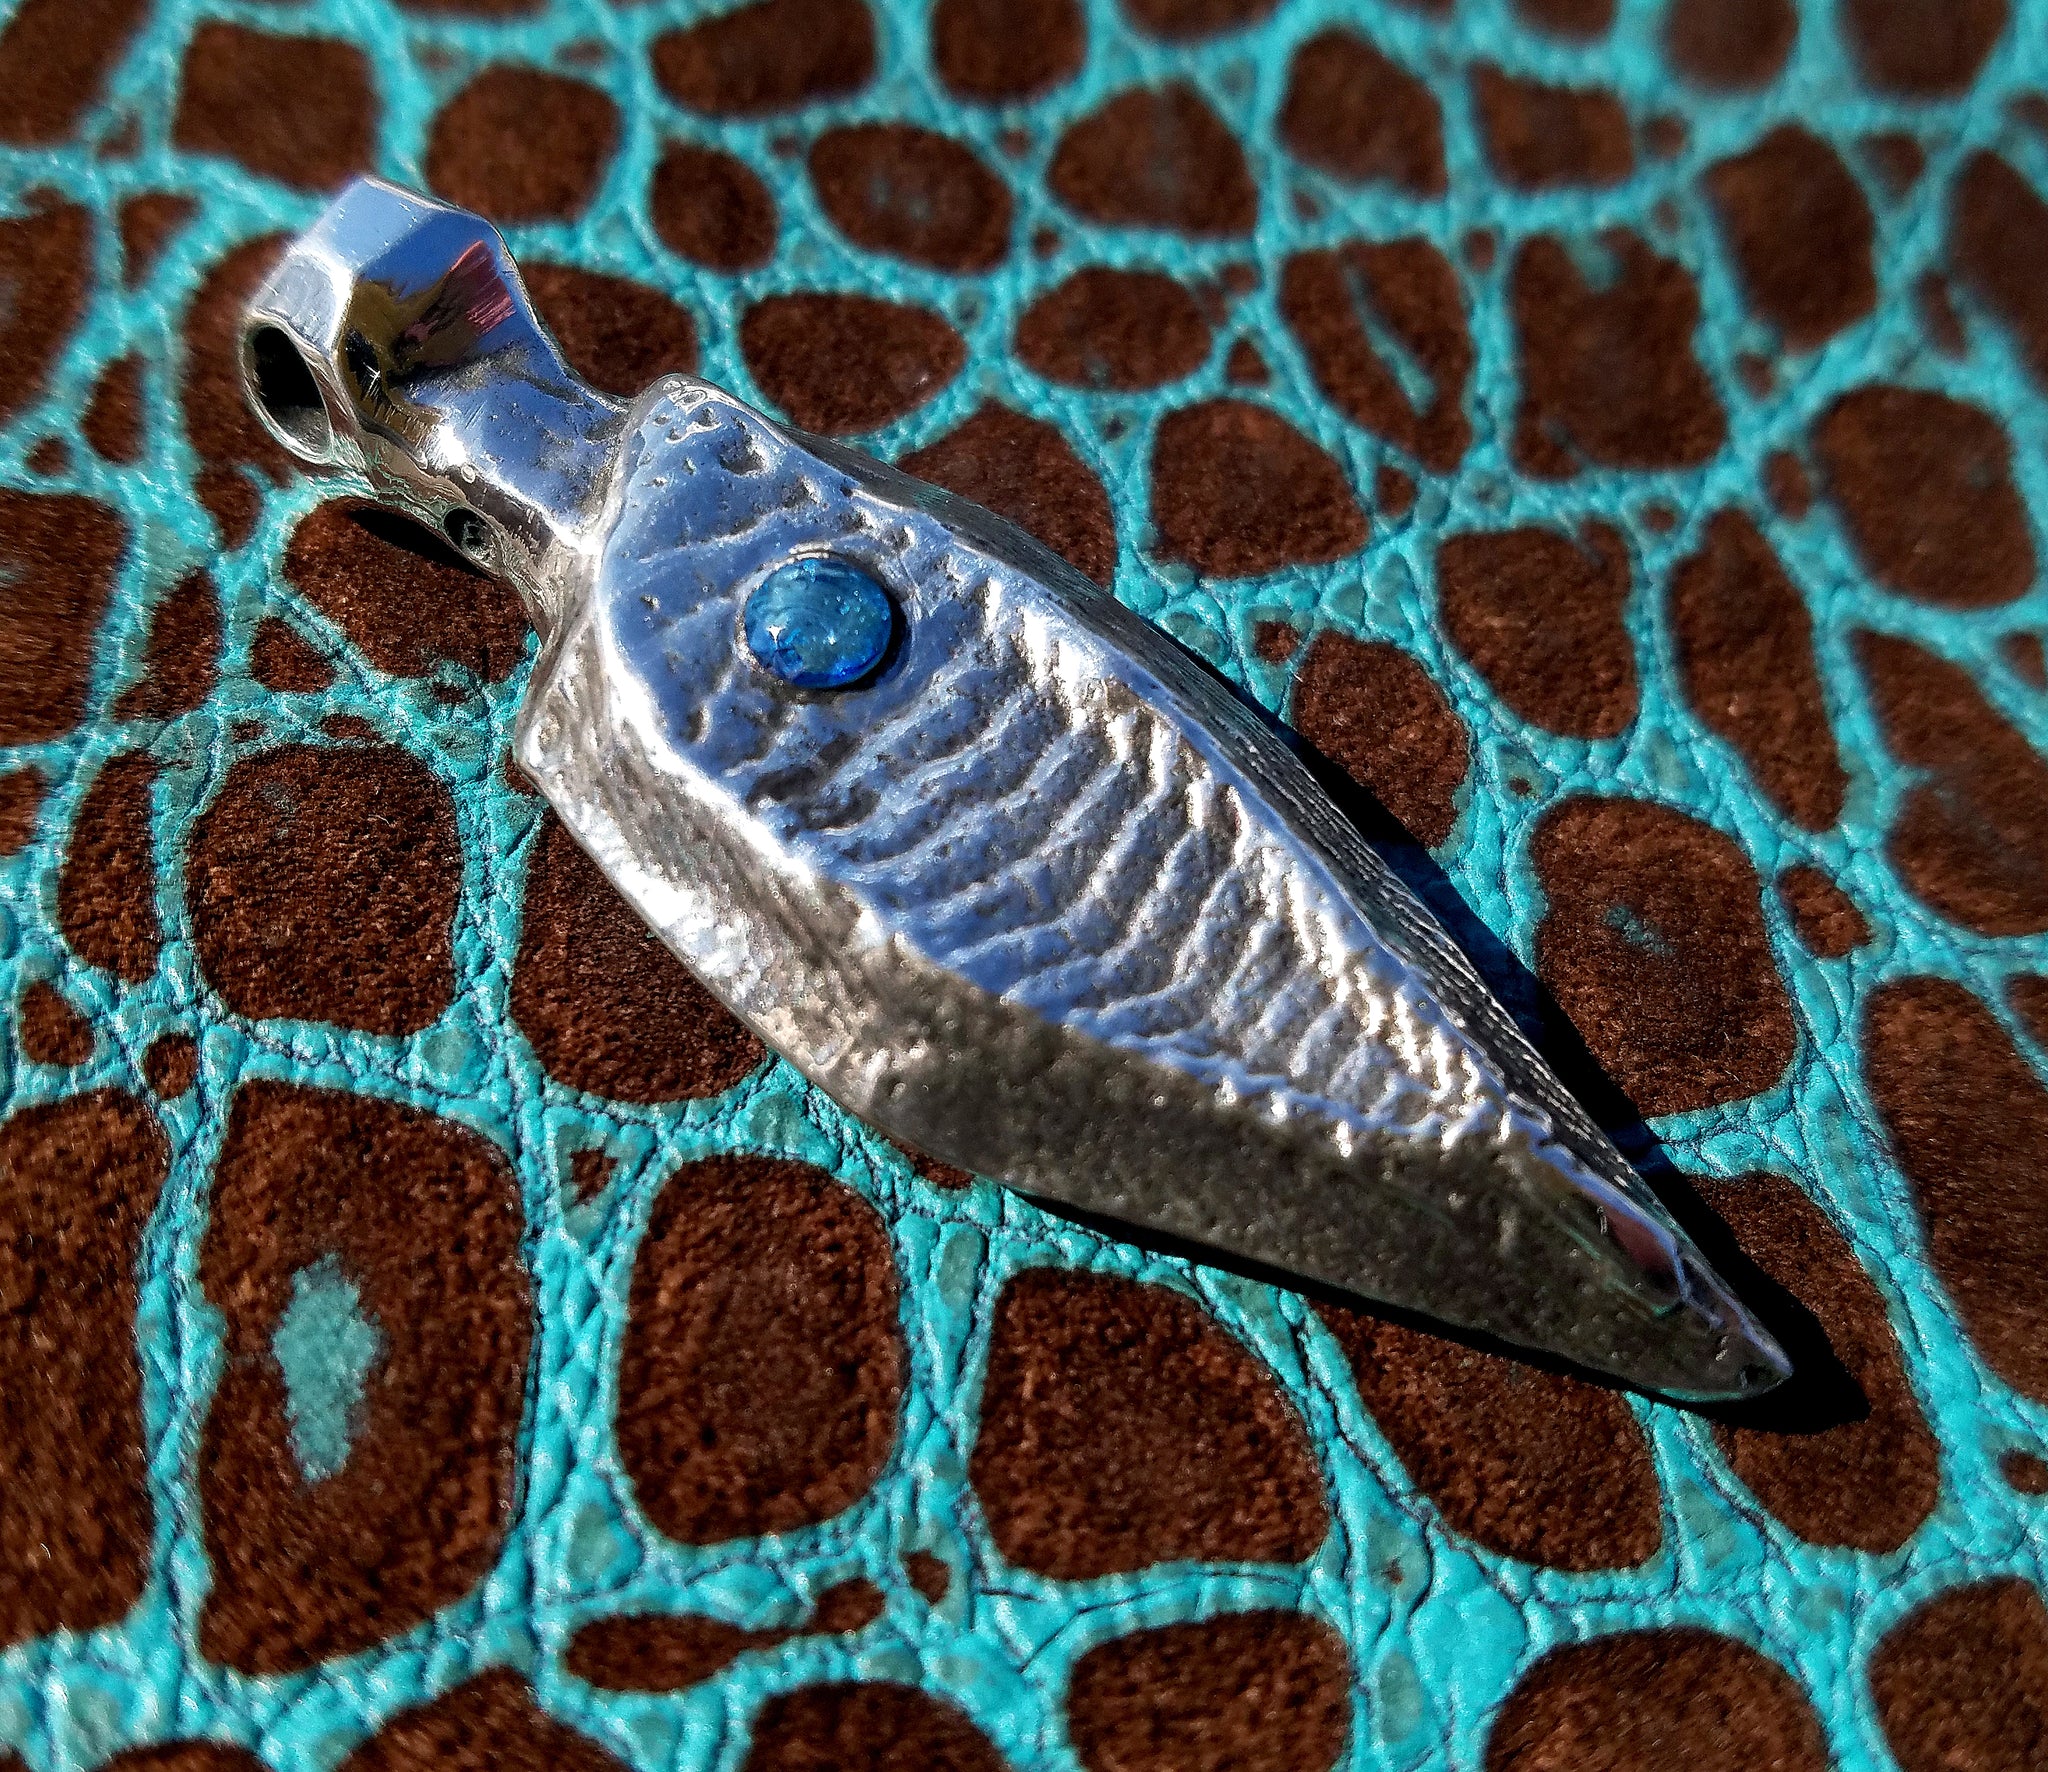 'Alien Seed' Hand-carved Hand-poured Cuttlefish Cast Pendant #3